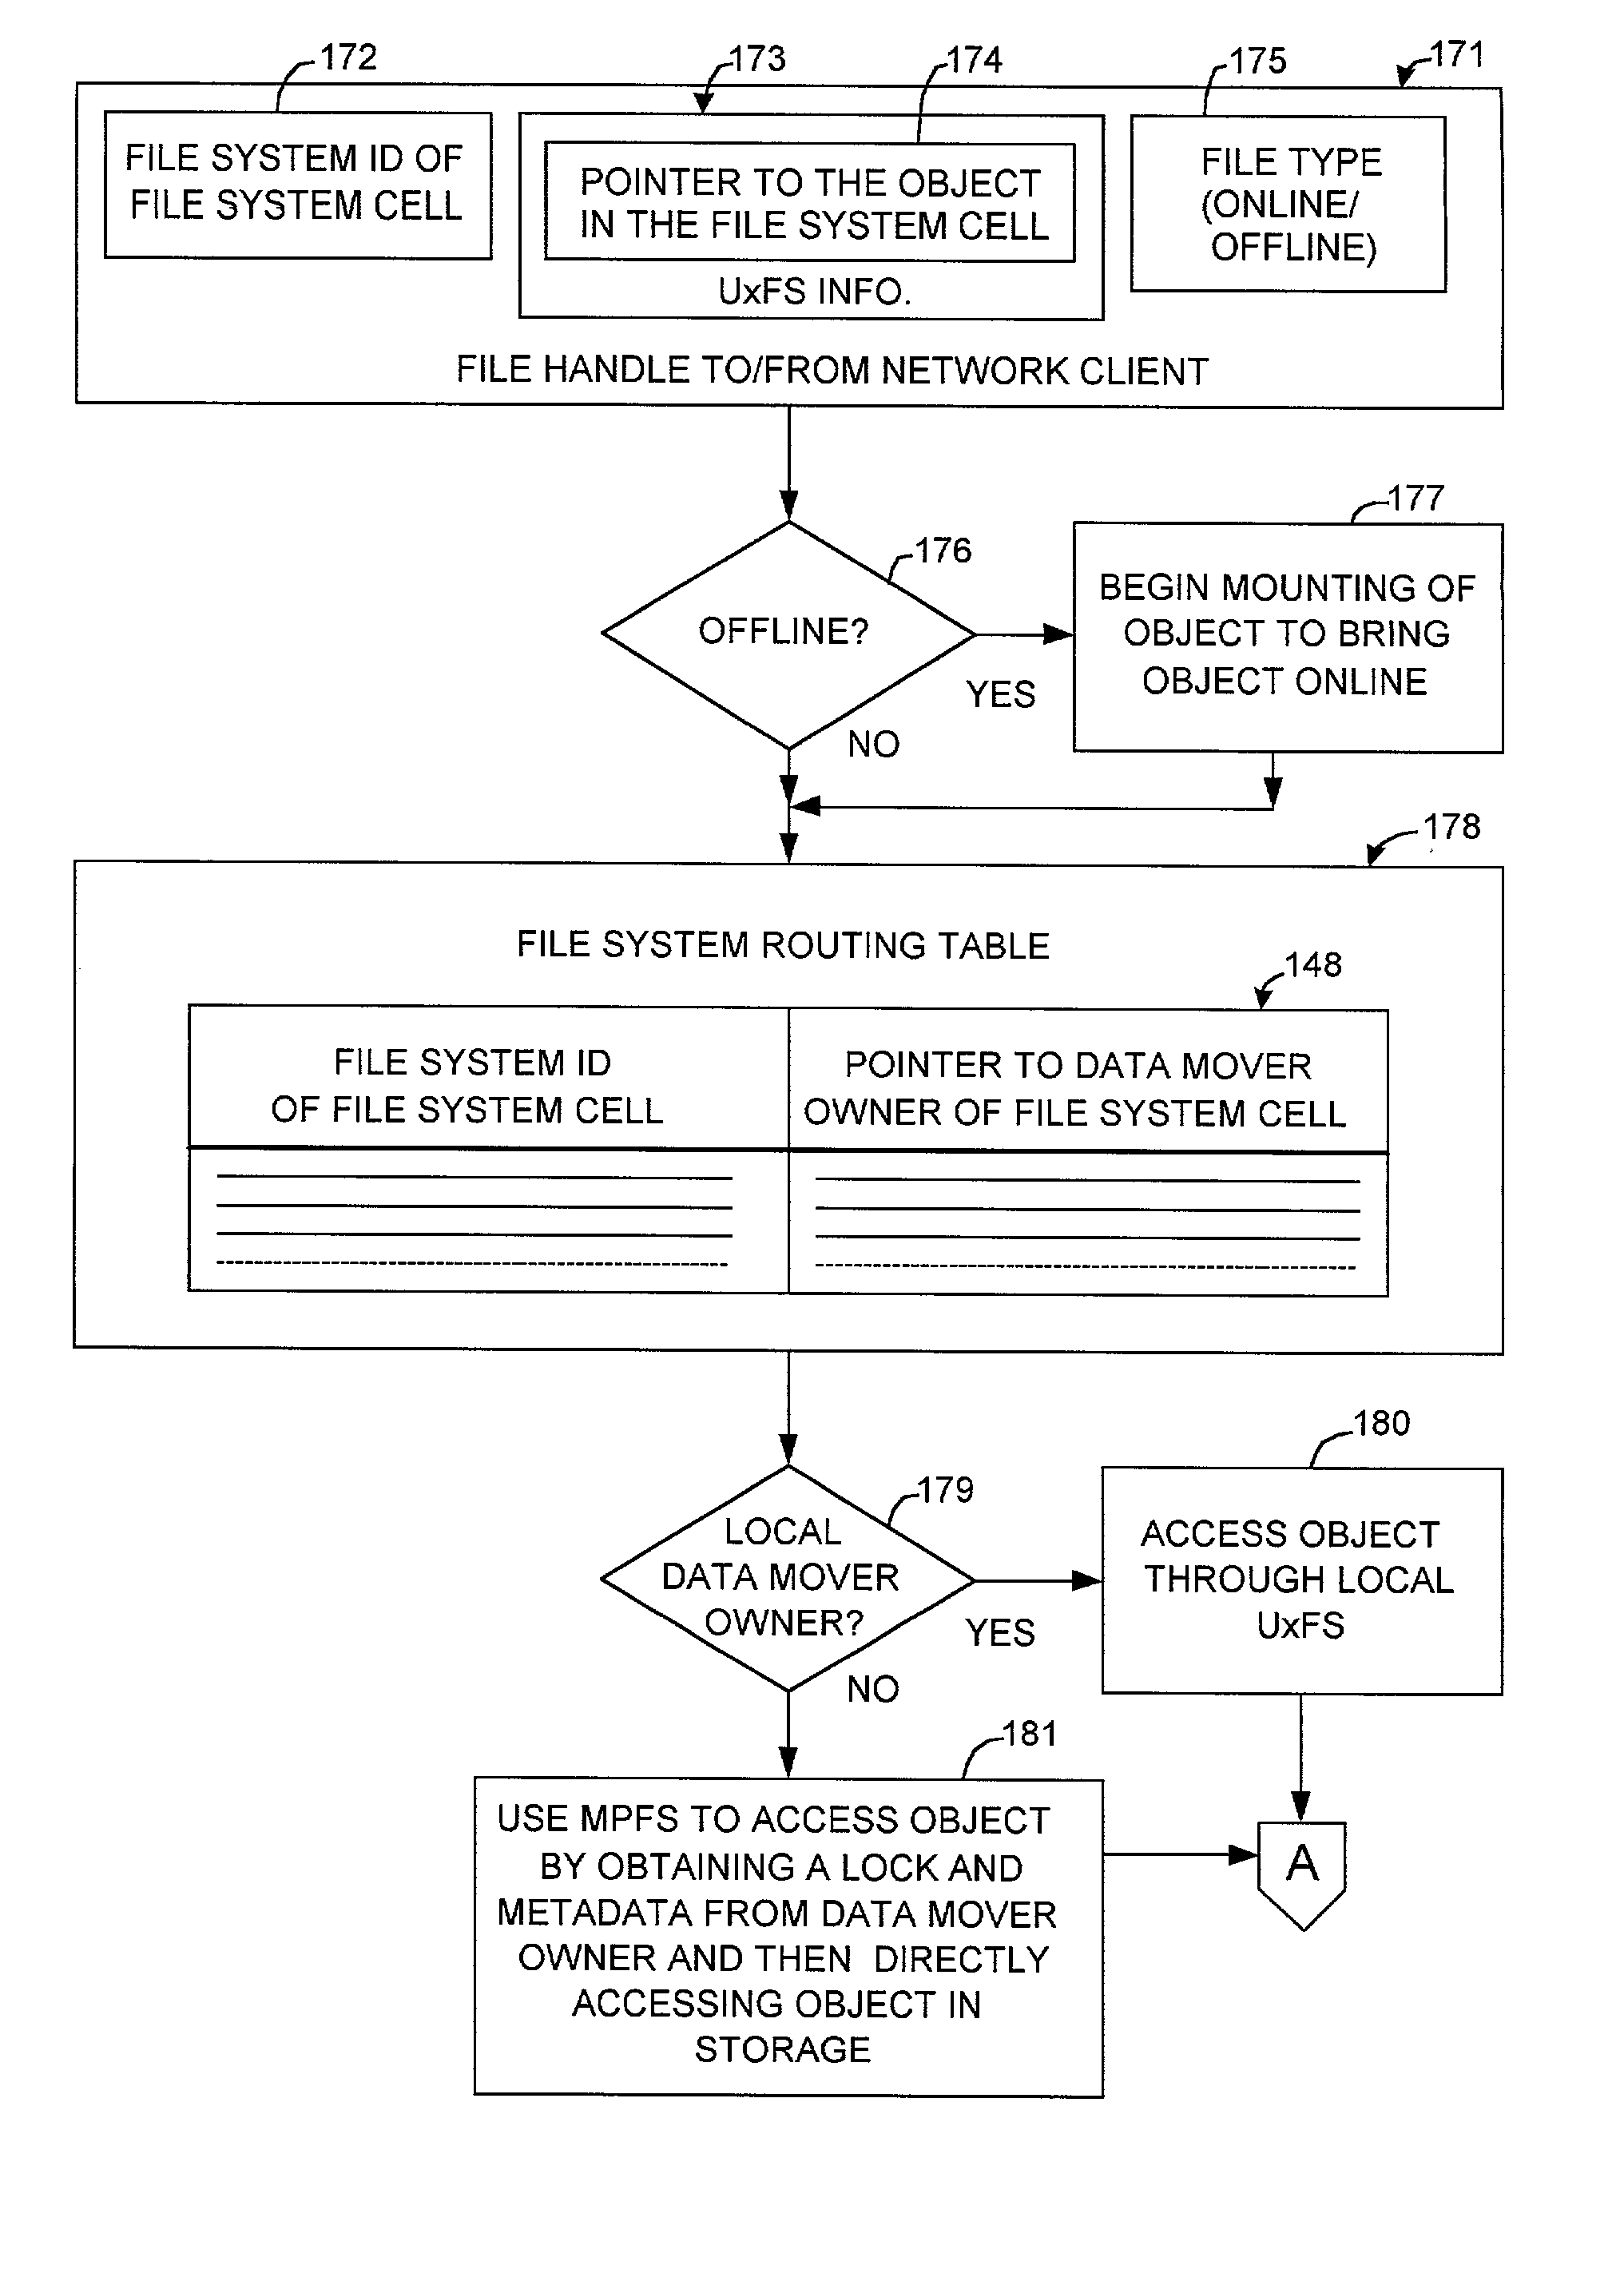 Cluster meta file system of file system cells managed by respective data movers of a network file server